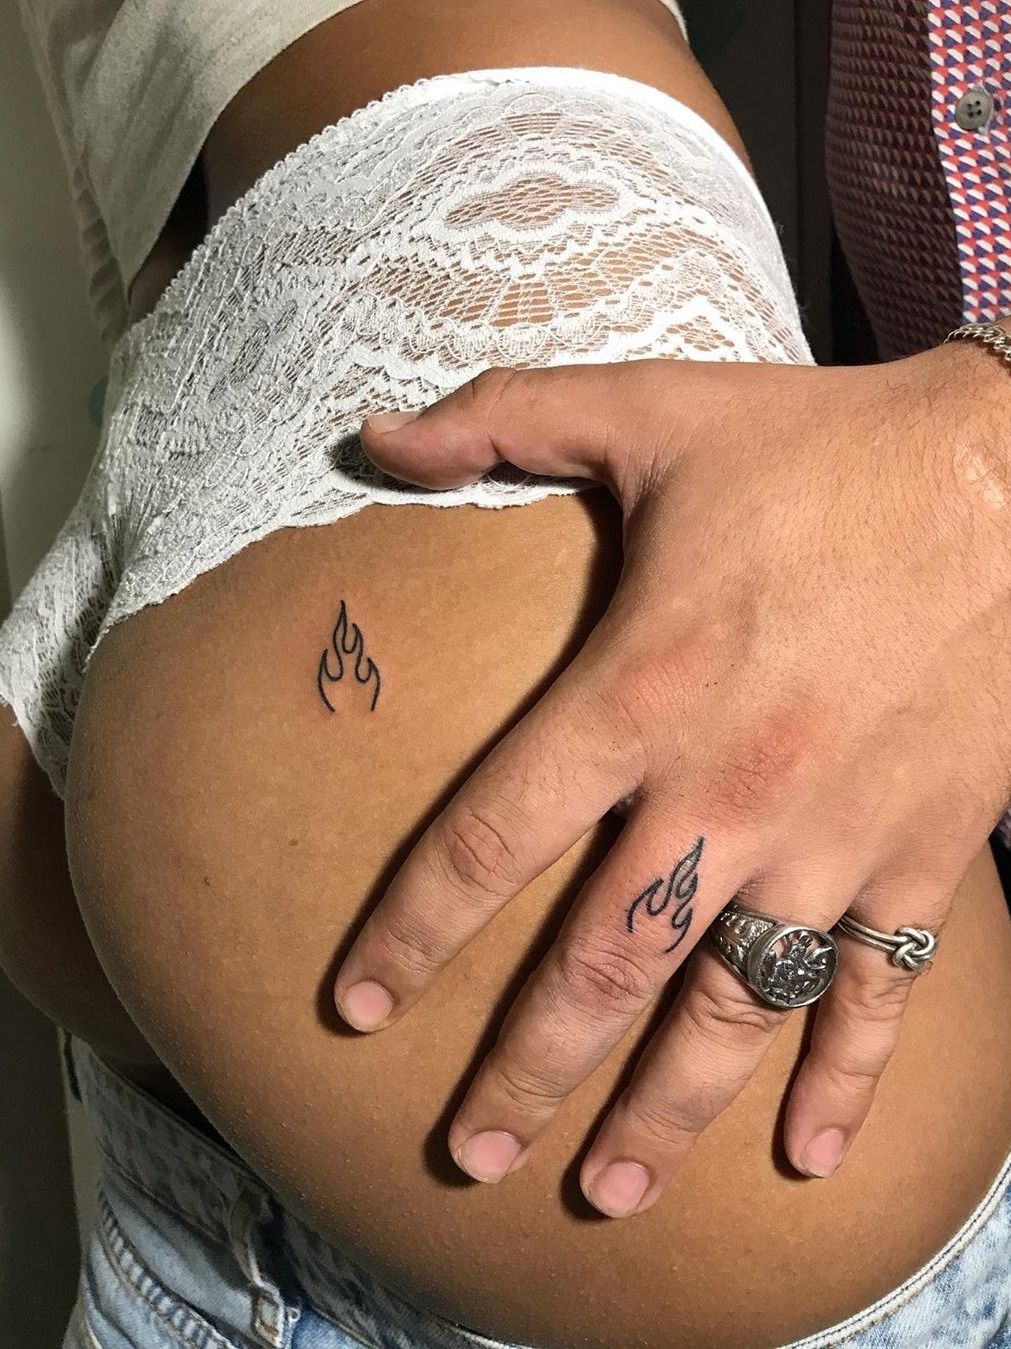 Tattoo Artist Proposes to Girlfriend With Some Seriously Creative Ink |  Allure